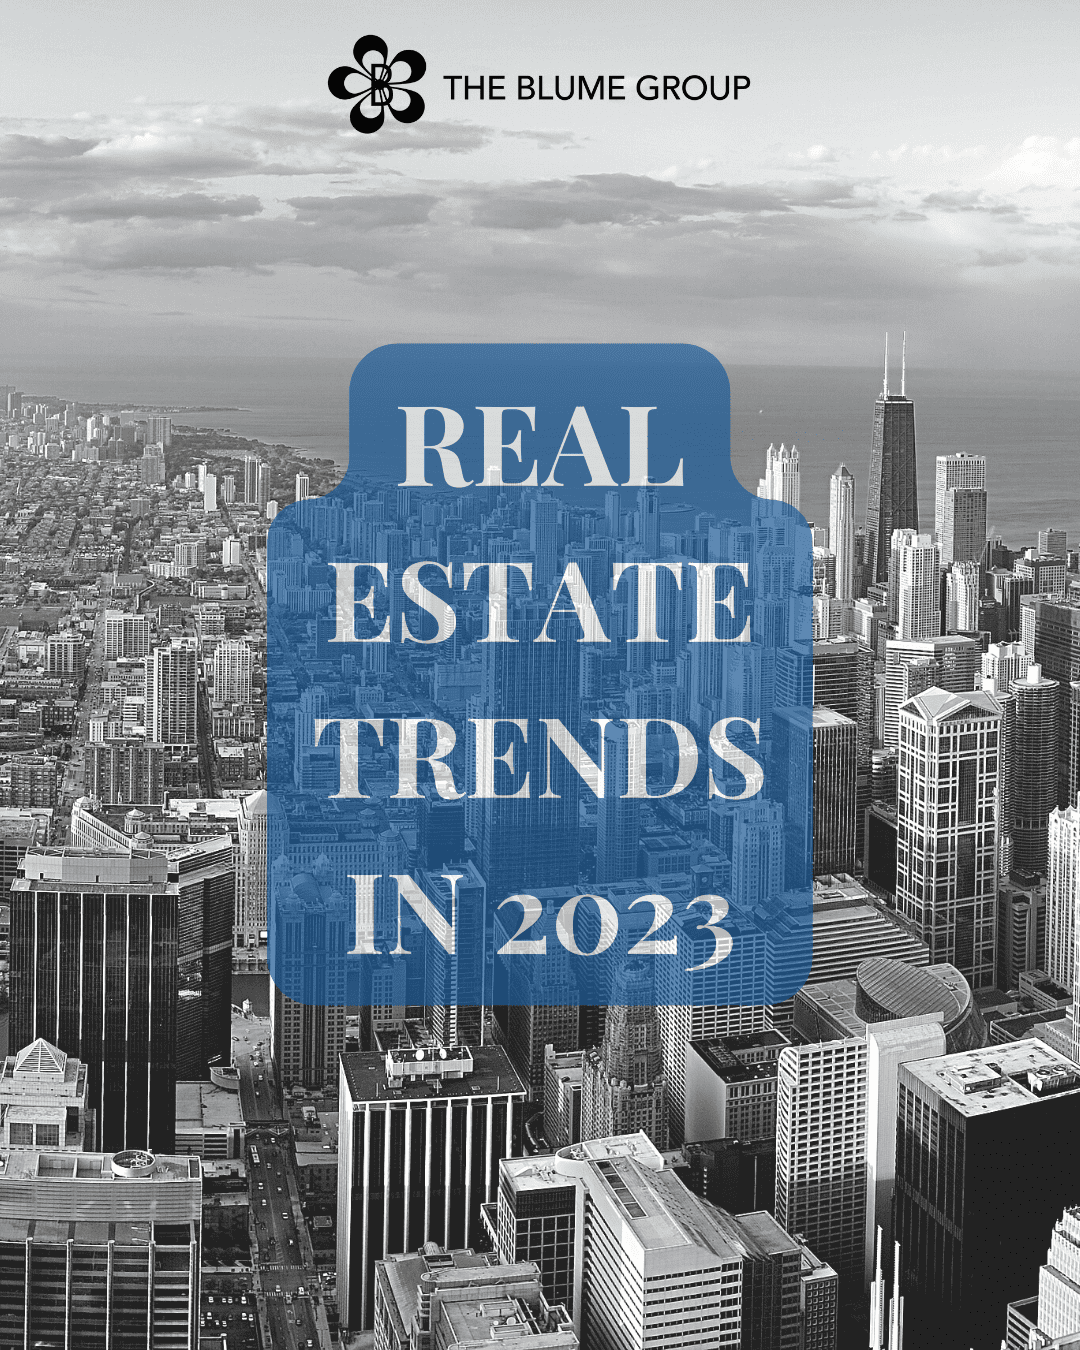 REAL ESTATE TRENDS IN 2023